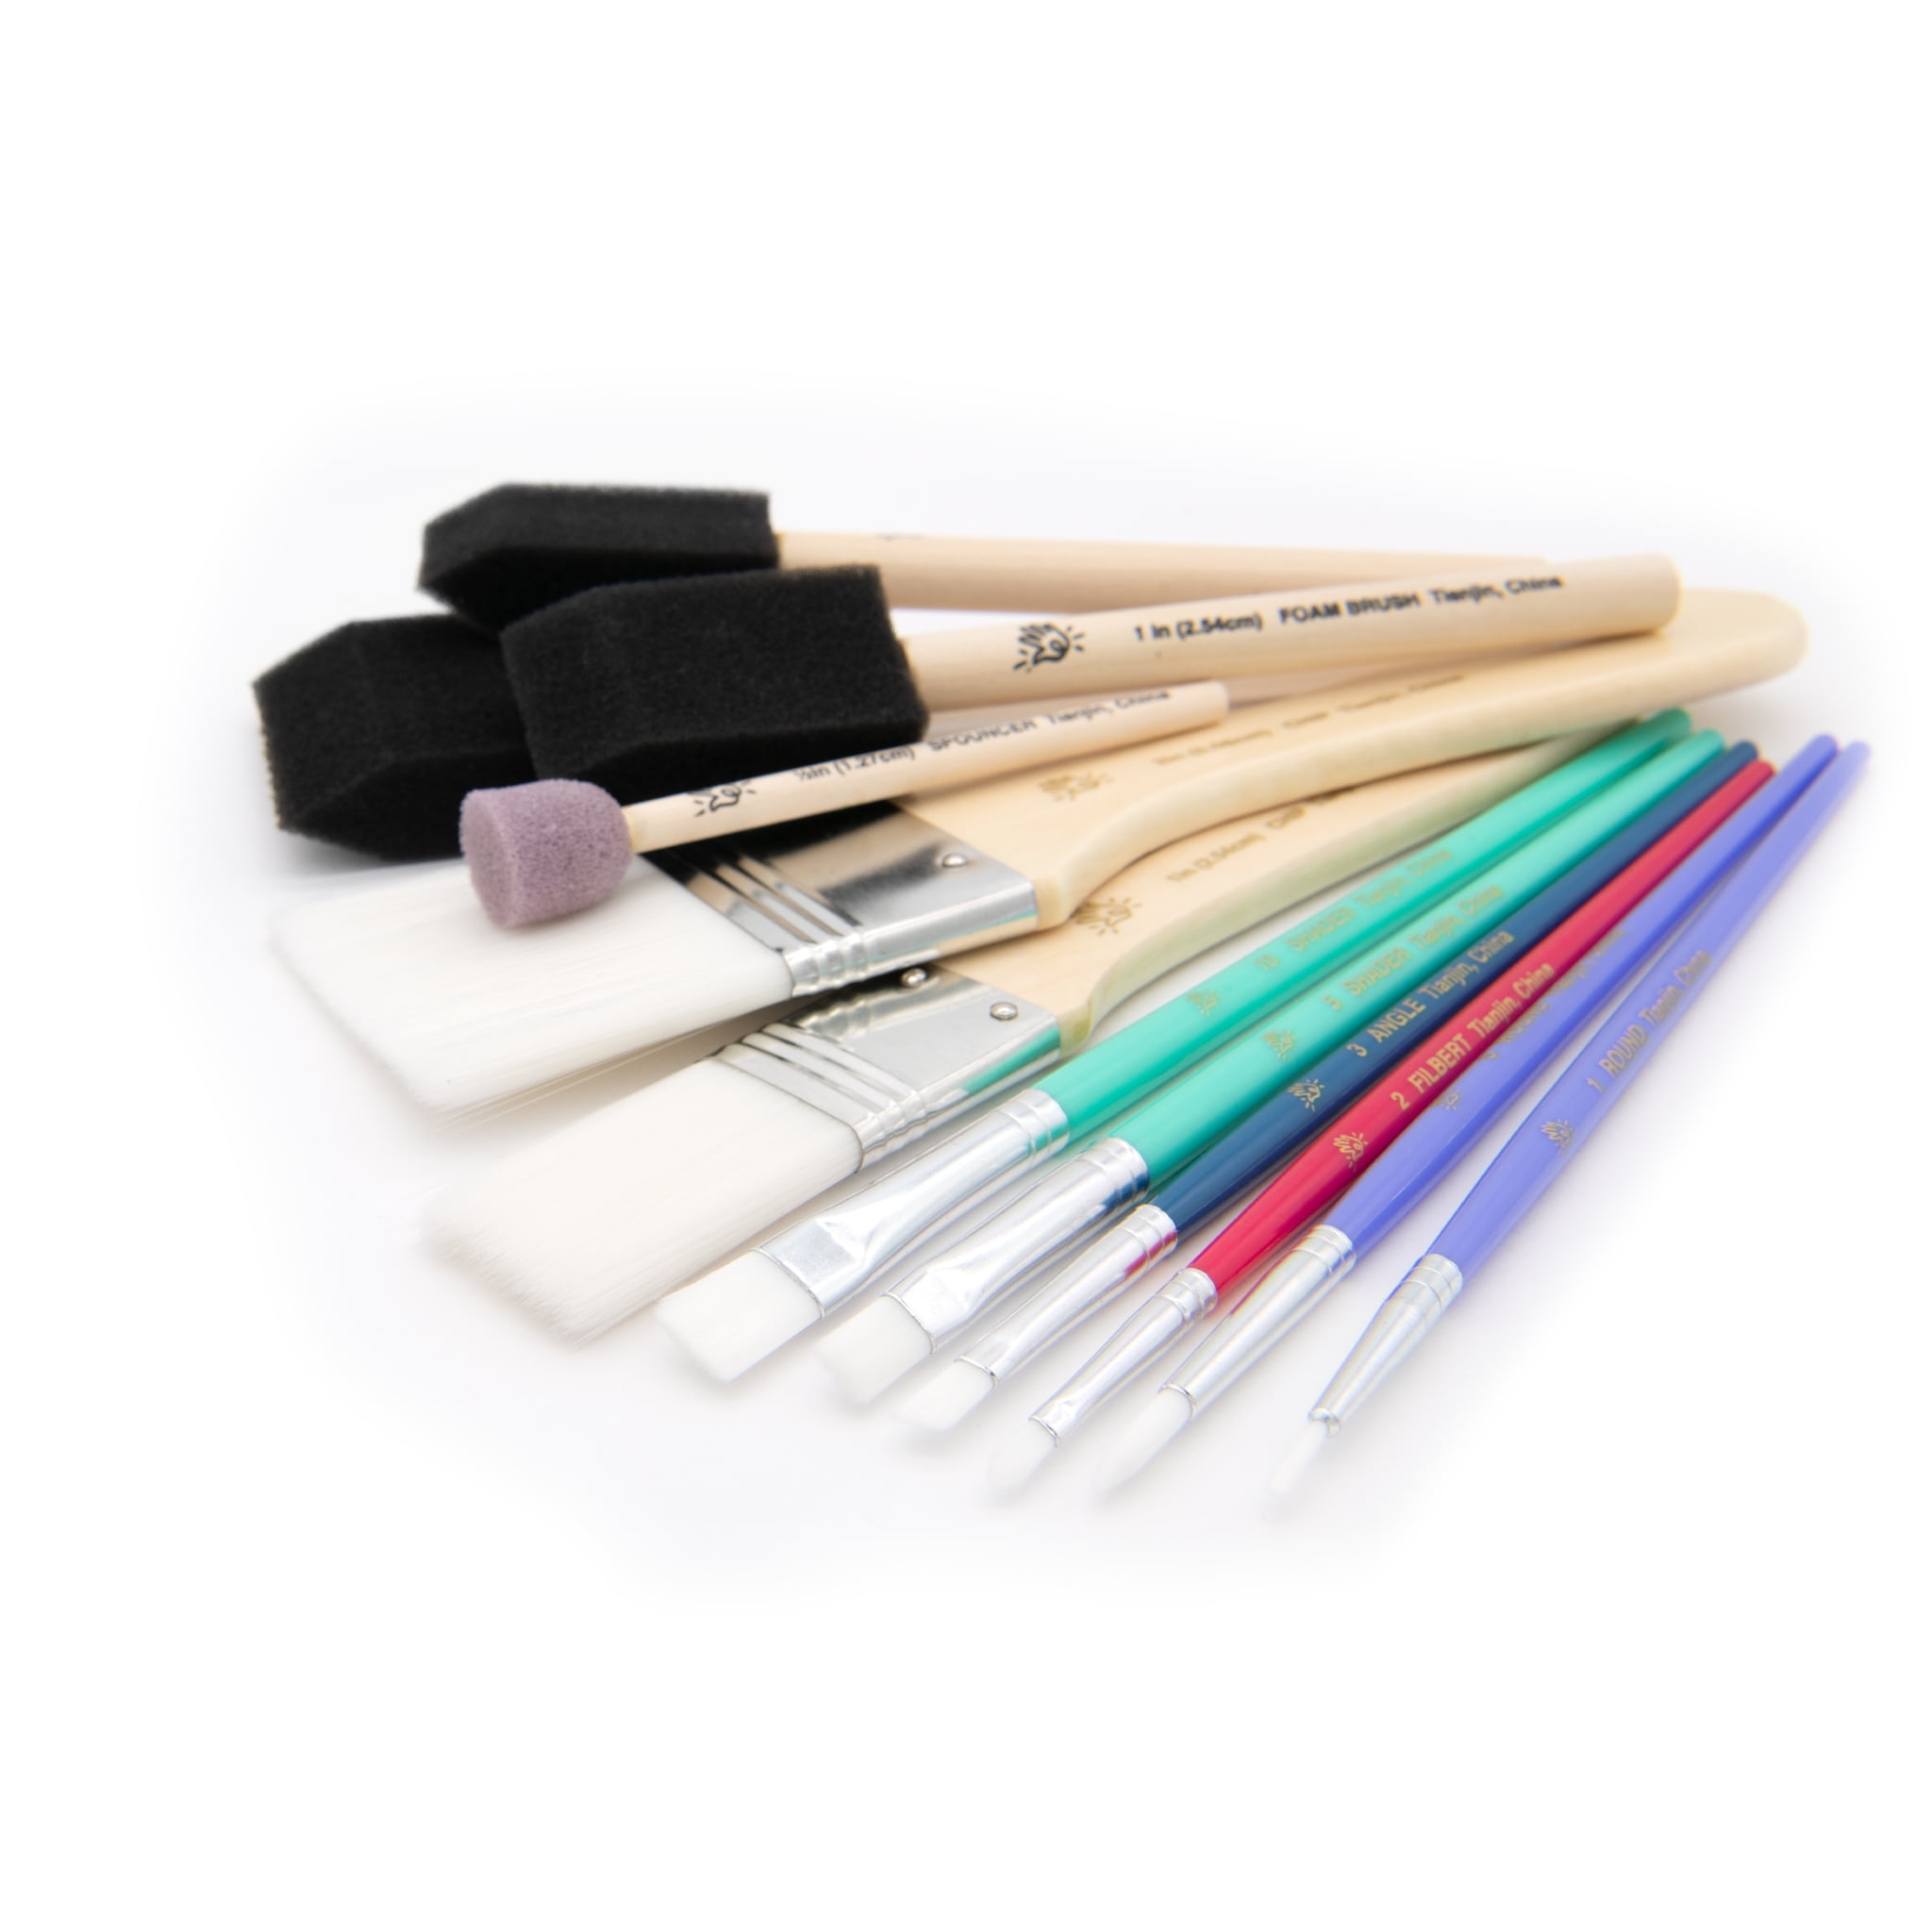 25 ASSORTED CRAFT BRUSHES PAINT BRUSH HOBBY CRAFT TOOL MODEL ACCESSORY 8940